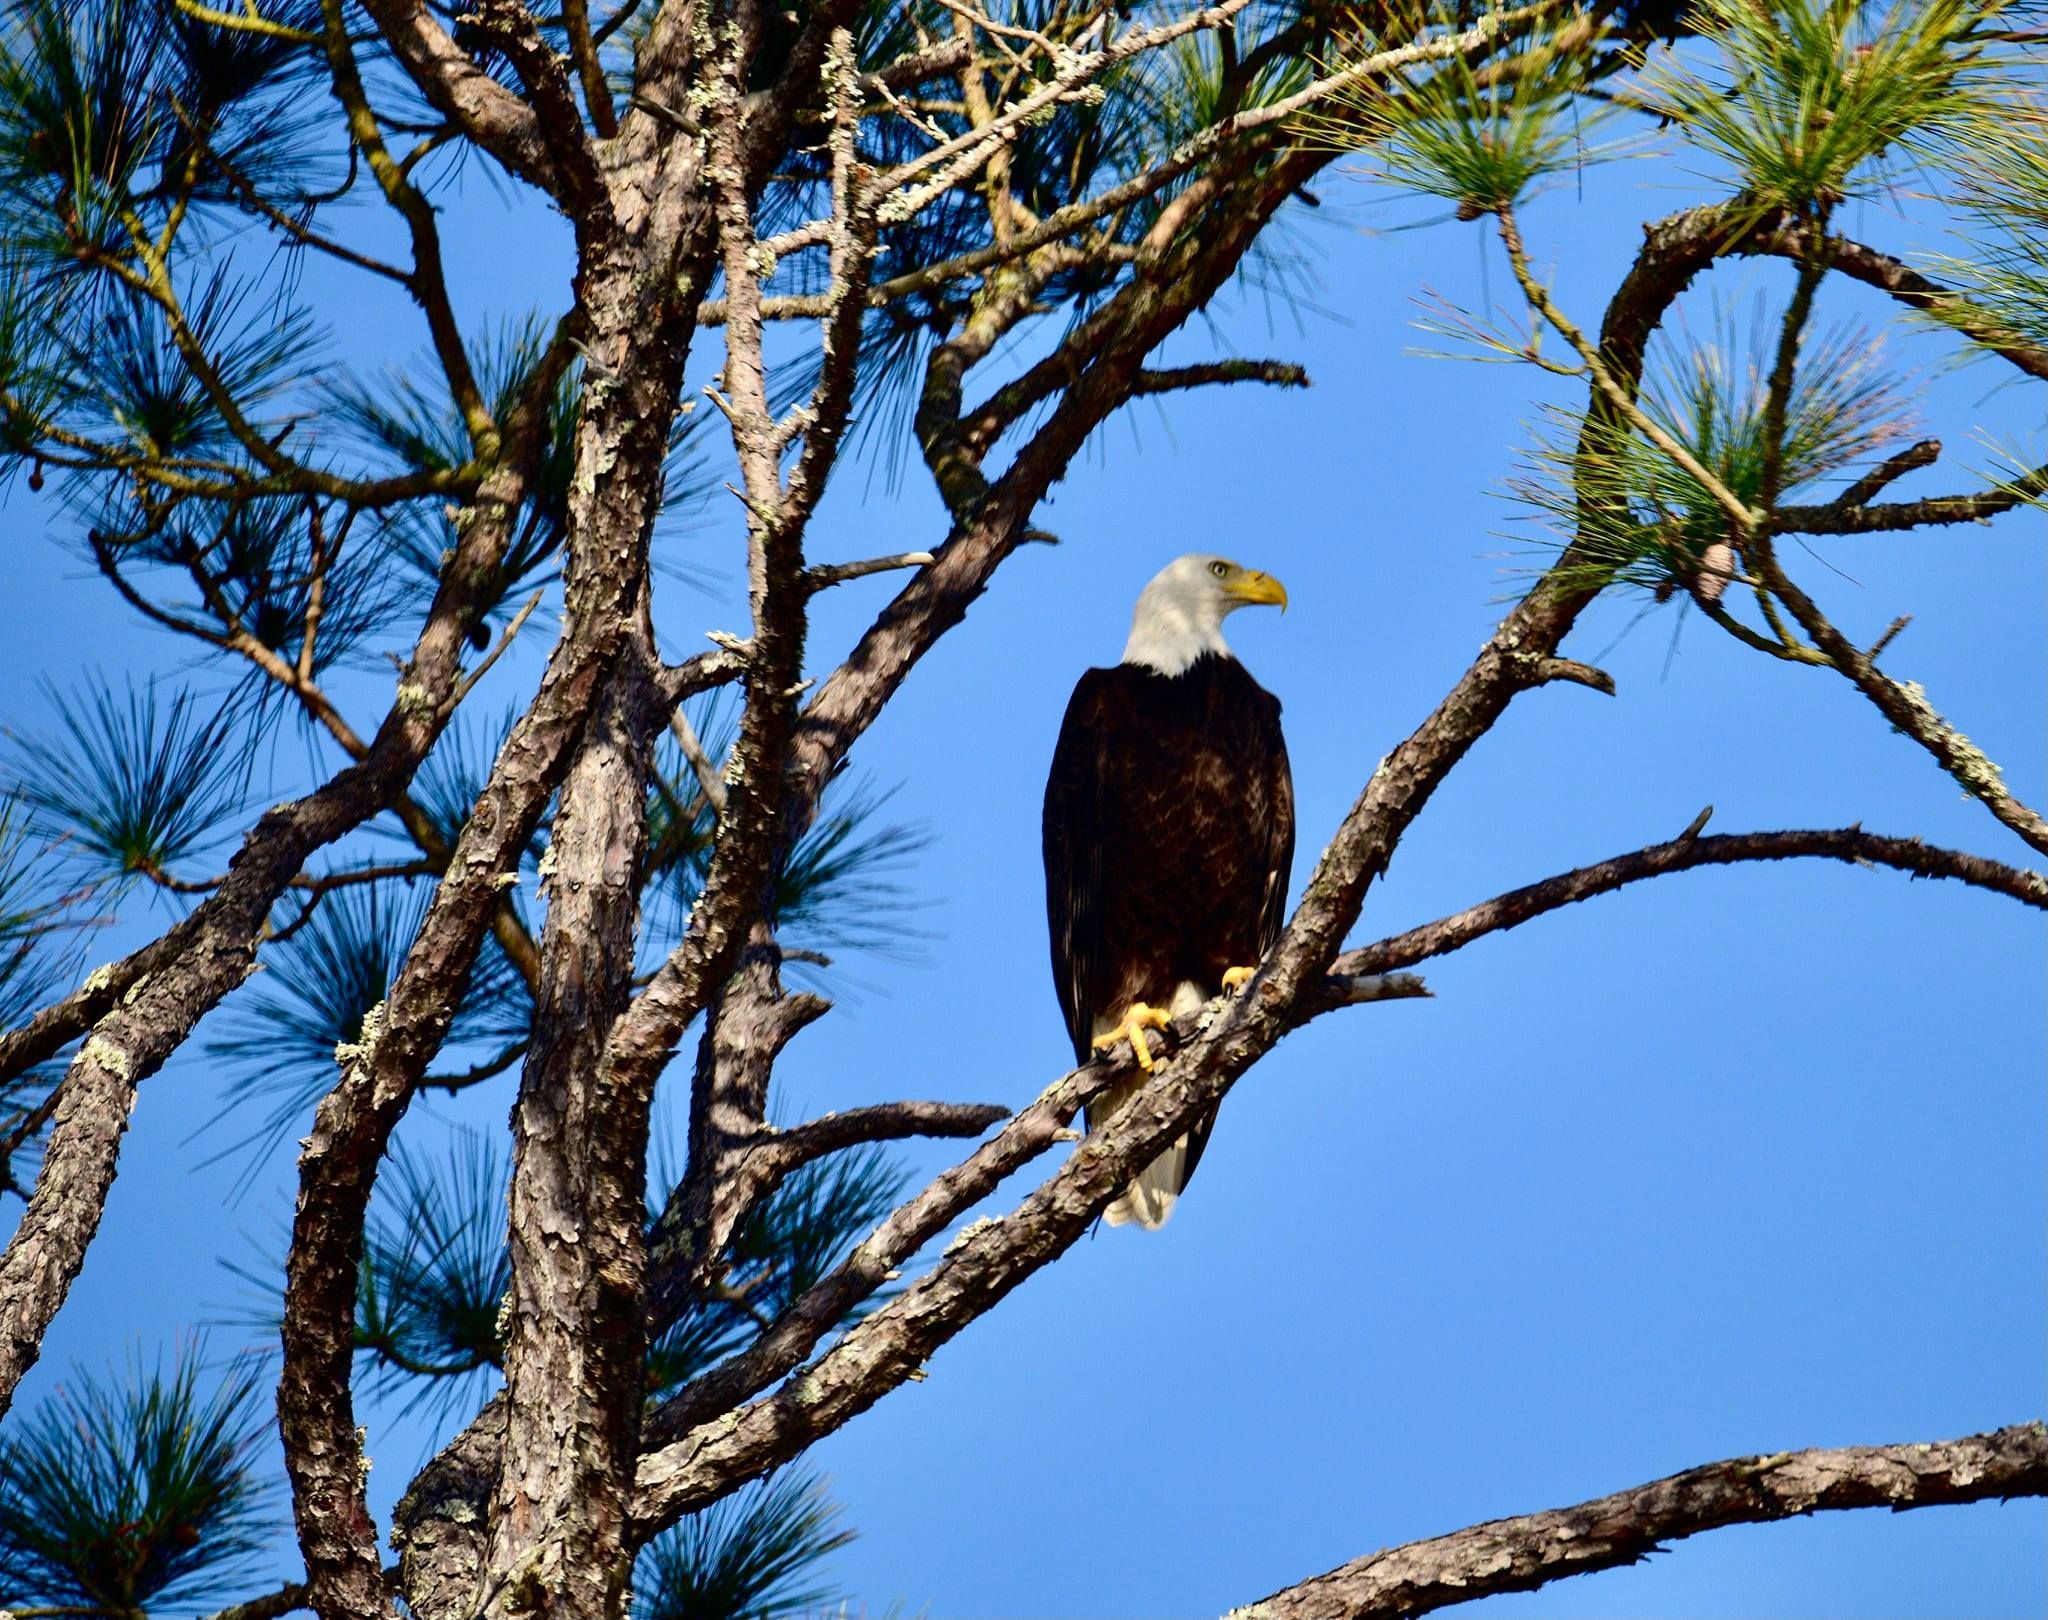 Did you know that eagle eyes are up to 8 times stronger than human eyes and adult bald eagles have a 7-foot wingspan?
Today's Photo of the Day was taken by Osmel Alfonso in Navarre.
If you would like to see more cool photos of eagles, check out the front of our Community section this week.